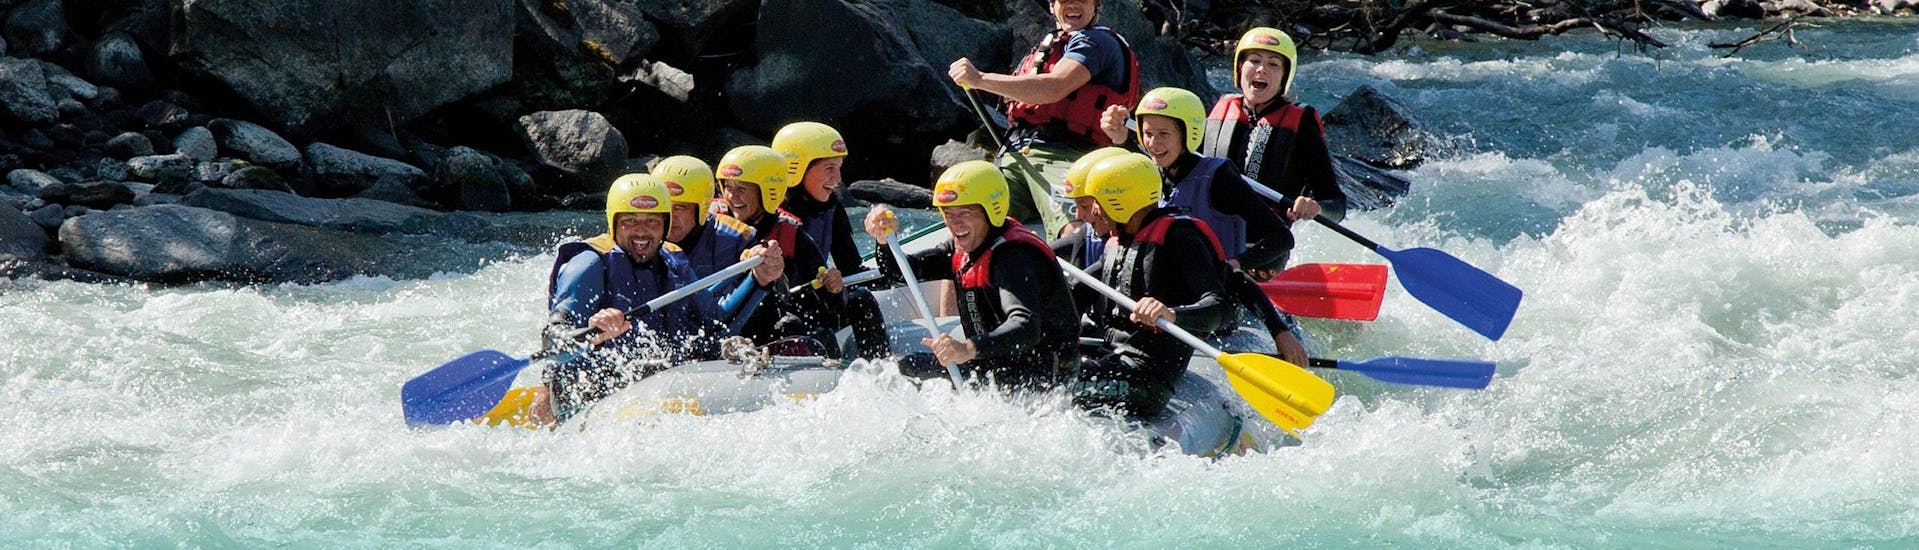 People in a rafting boat while Rafting on the Isel River - Sports Tour Plus with Adventurepark Osttirol.